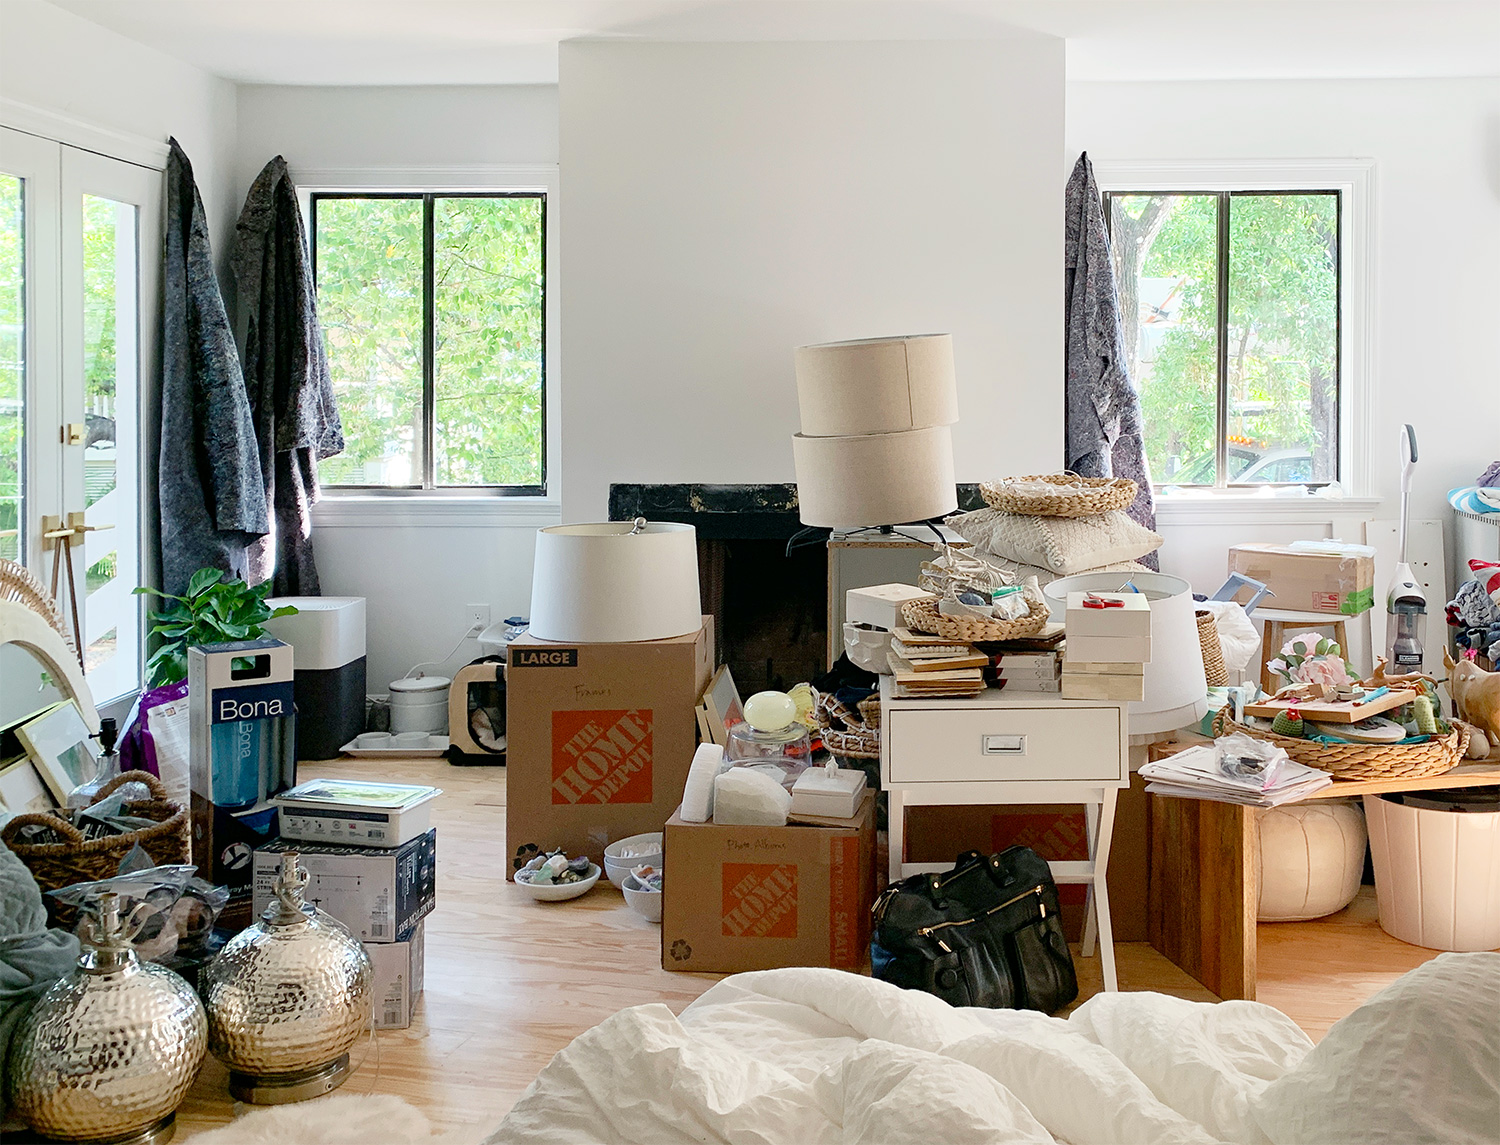 A cluttered bedroom after a move with boxes and junk everywhere